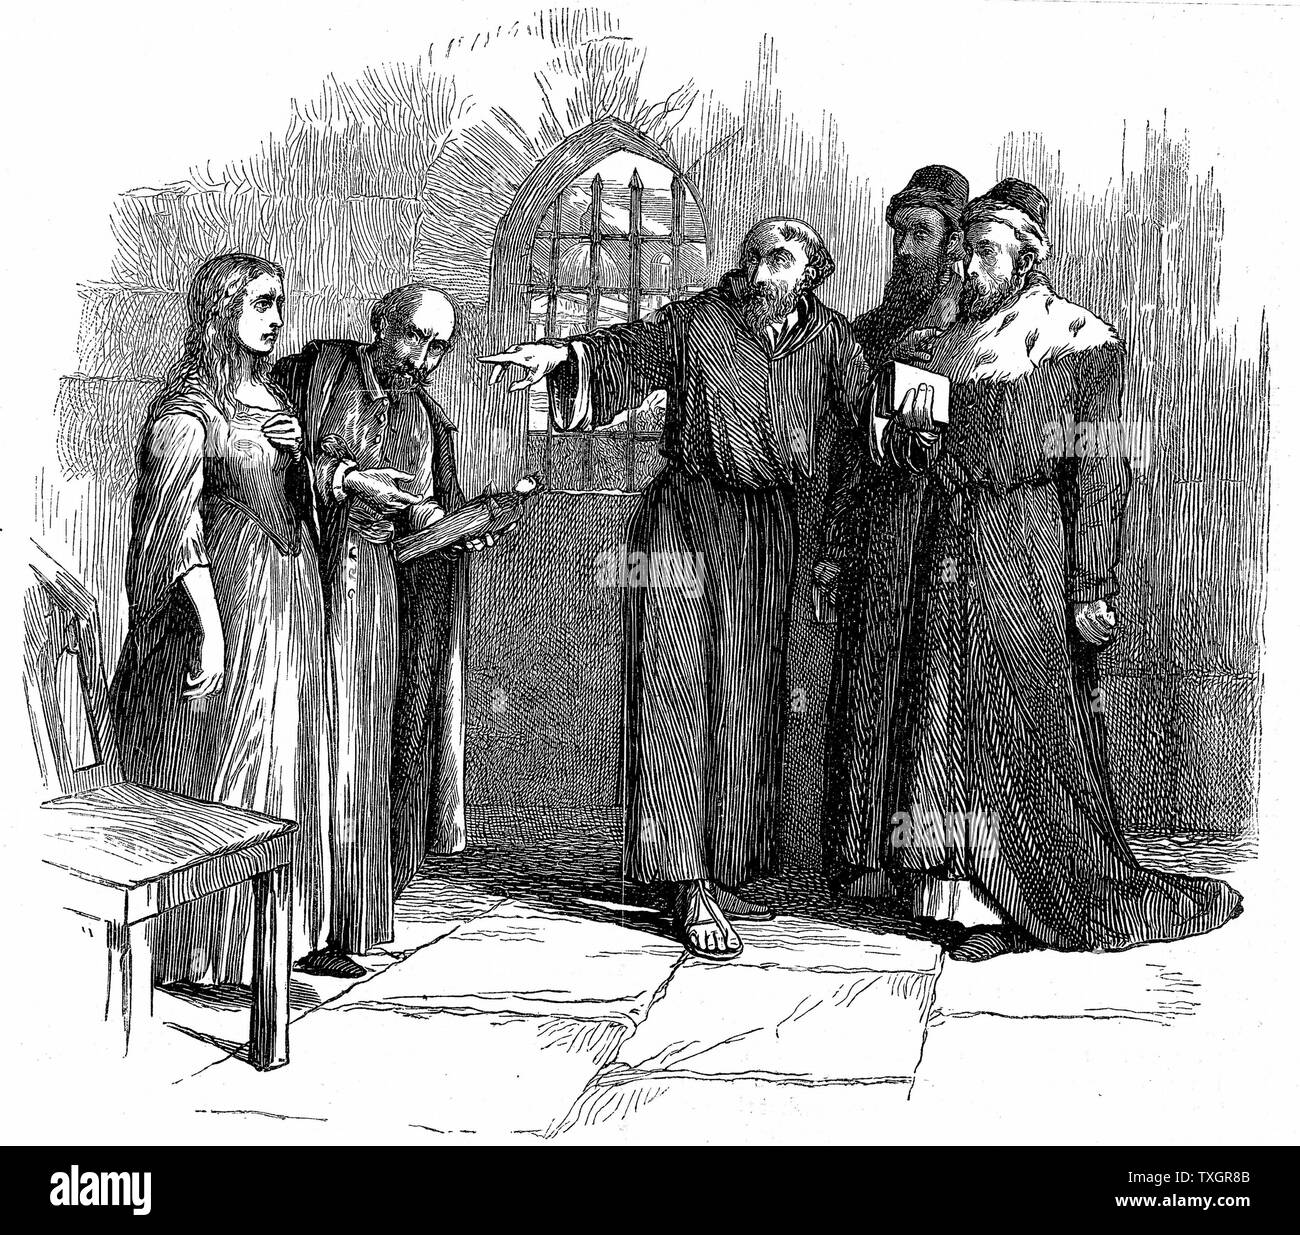 Persecution of Waldenses (Valdenses:Vaudois:Valdesi) by Roman Catholic church. Lucrezia Castellani accused of heresy before Inquisitors at Turin after taking part in a banned Waldenses service. Condemned and burnt at the stake: c1476.  19th century  Engraving Stock Photo